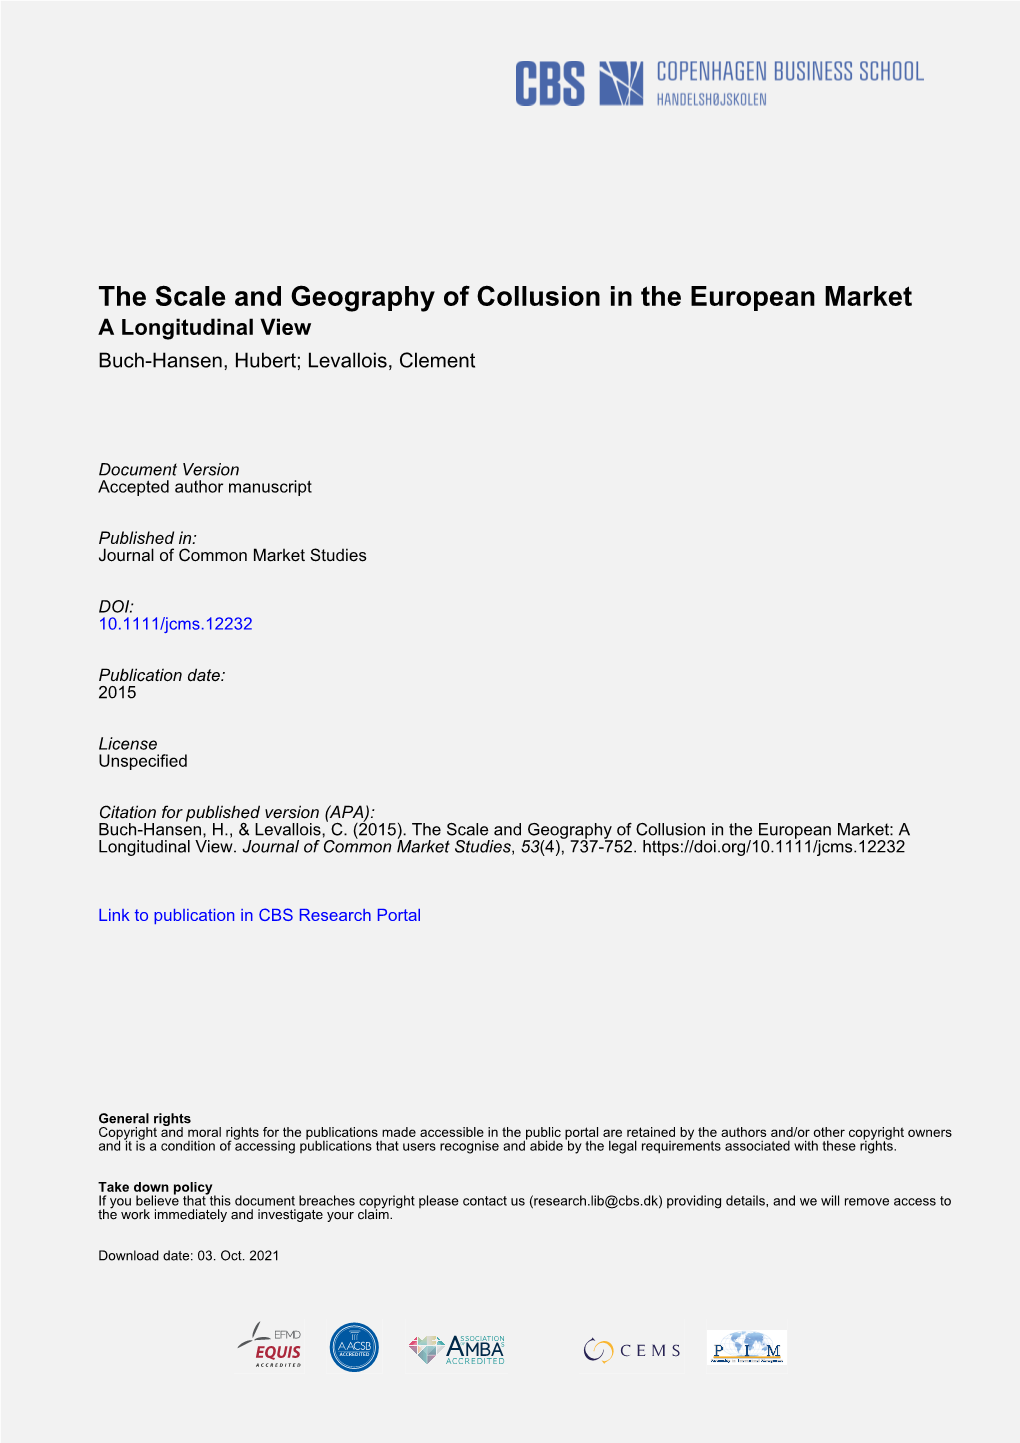 The Scale and Geography of Collusion in the European Market a Longitudinal View Buch-Hansen, Hubert; Levallois, Clement